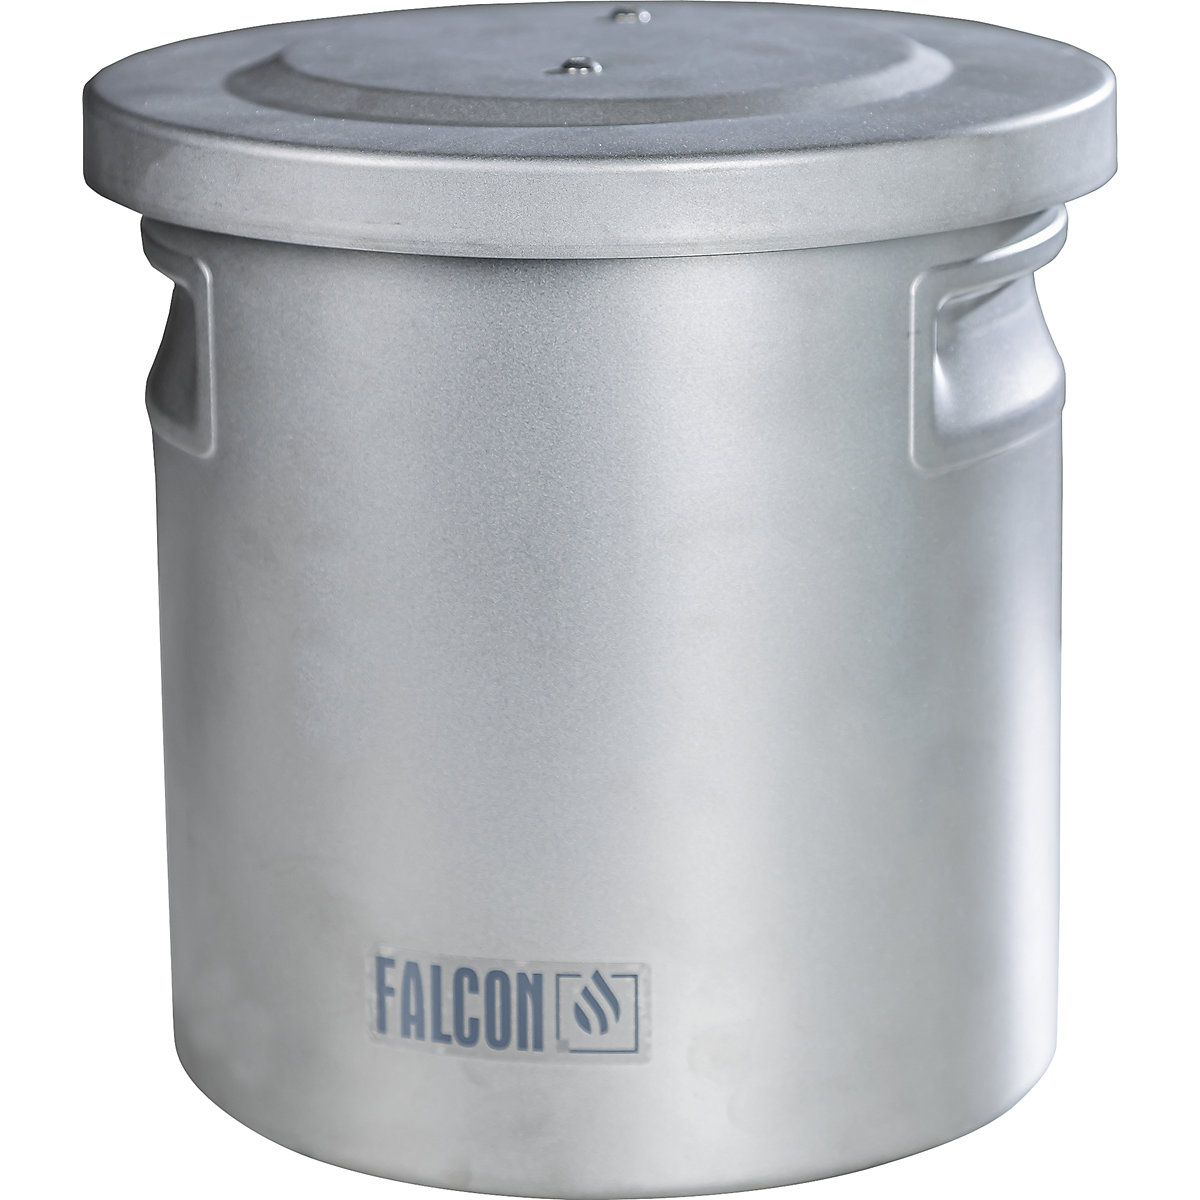 Small parts cleaner, capacity 8 l - FALCON